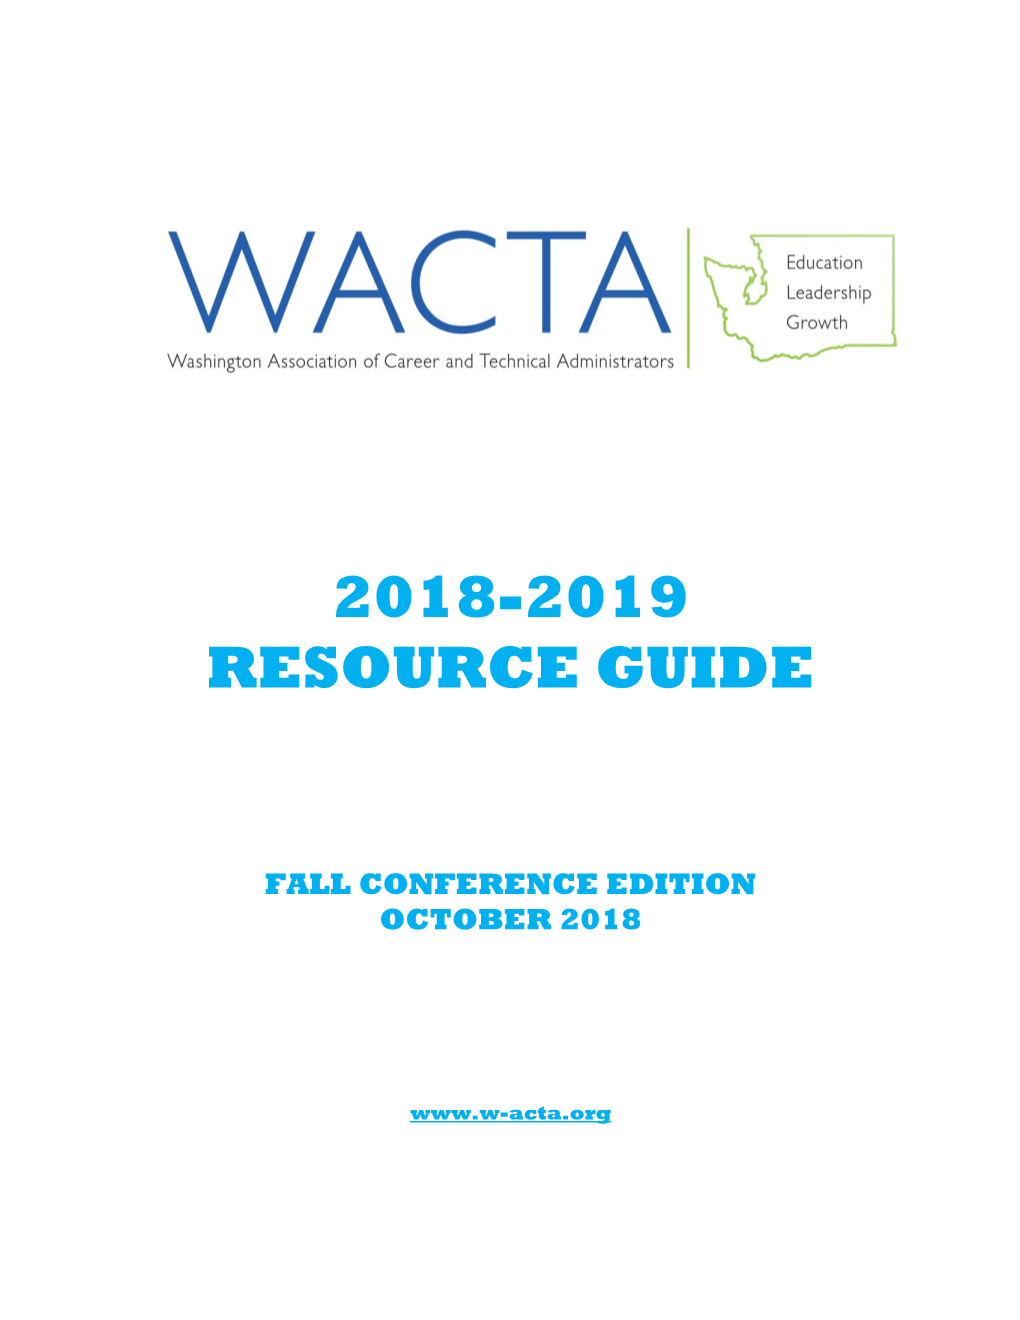 2018-2019 Resource Guide